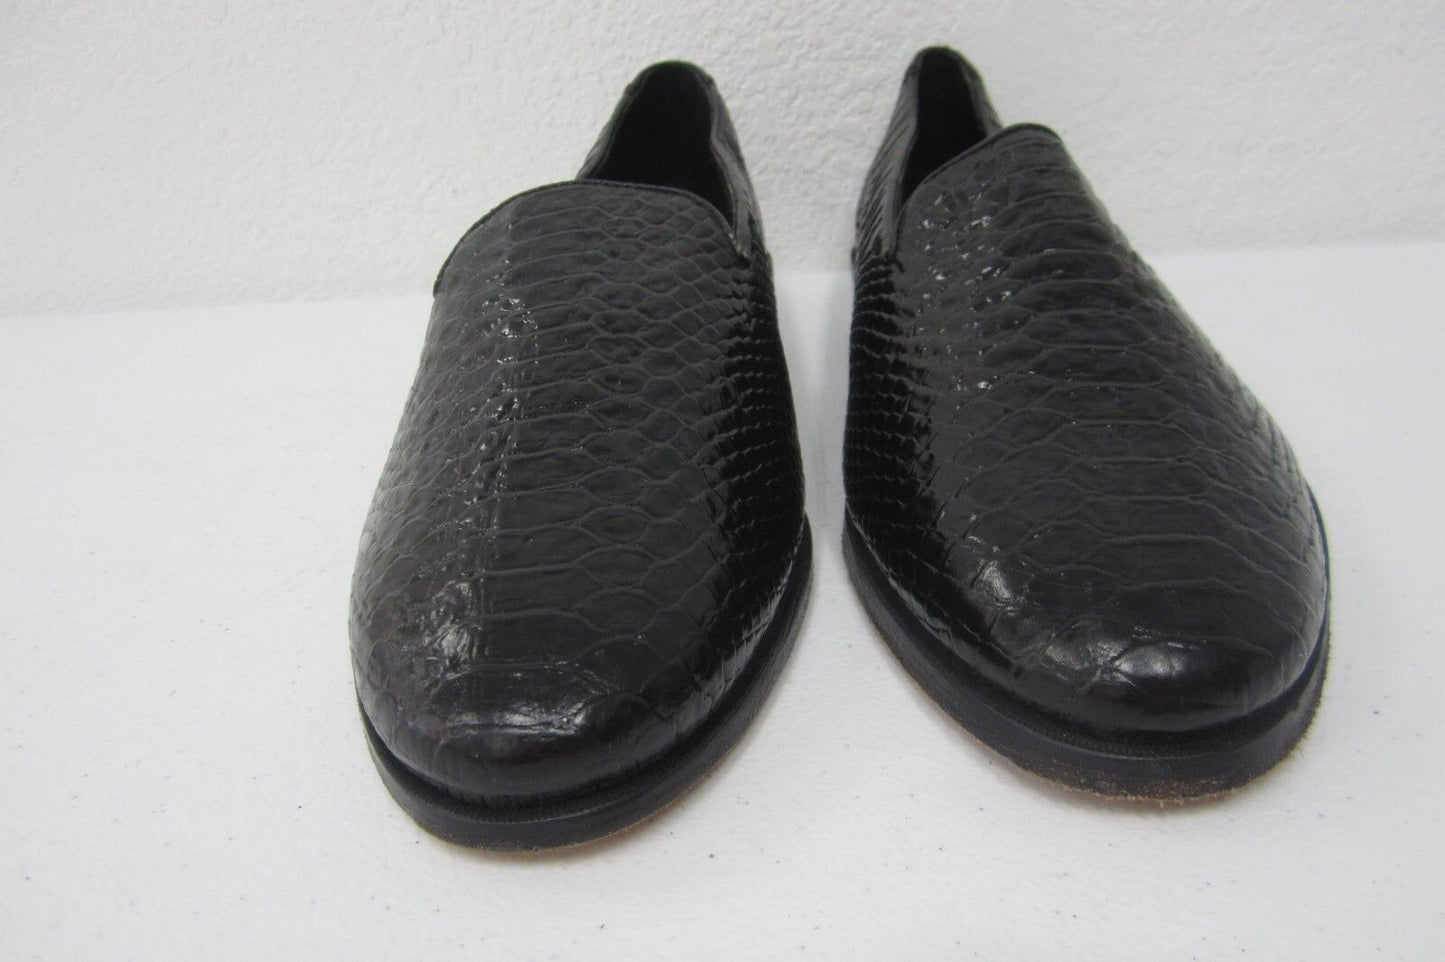 Stacy Adams Black Leather Croc Embossed Slip On Loafers Men’s Dress Shoes 11 M